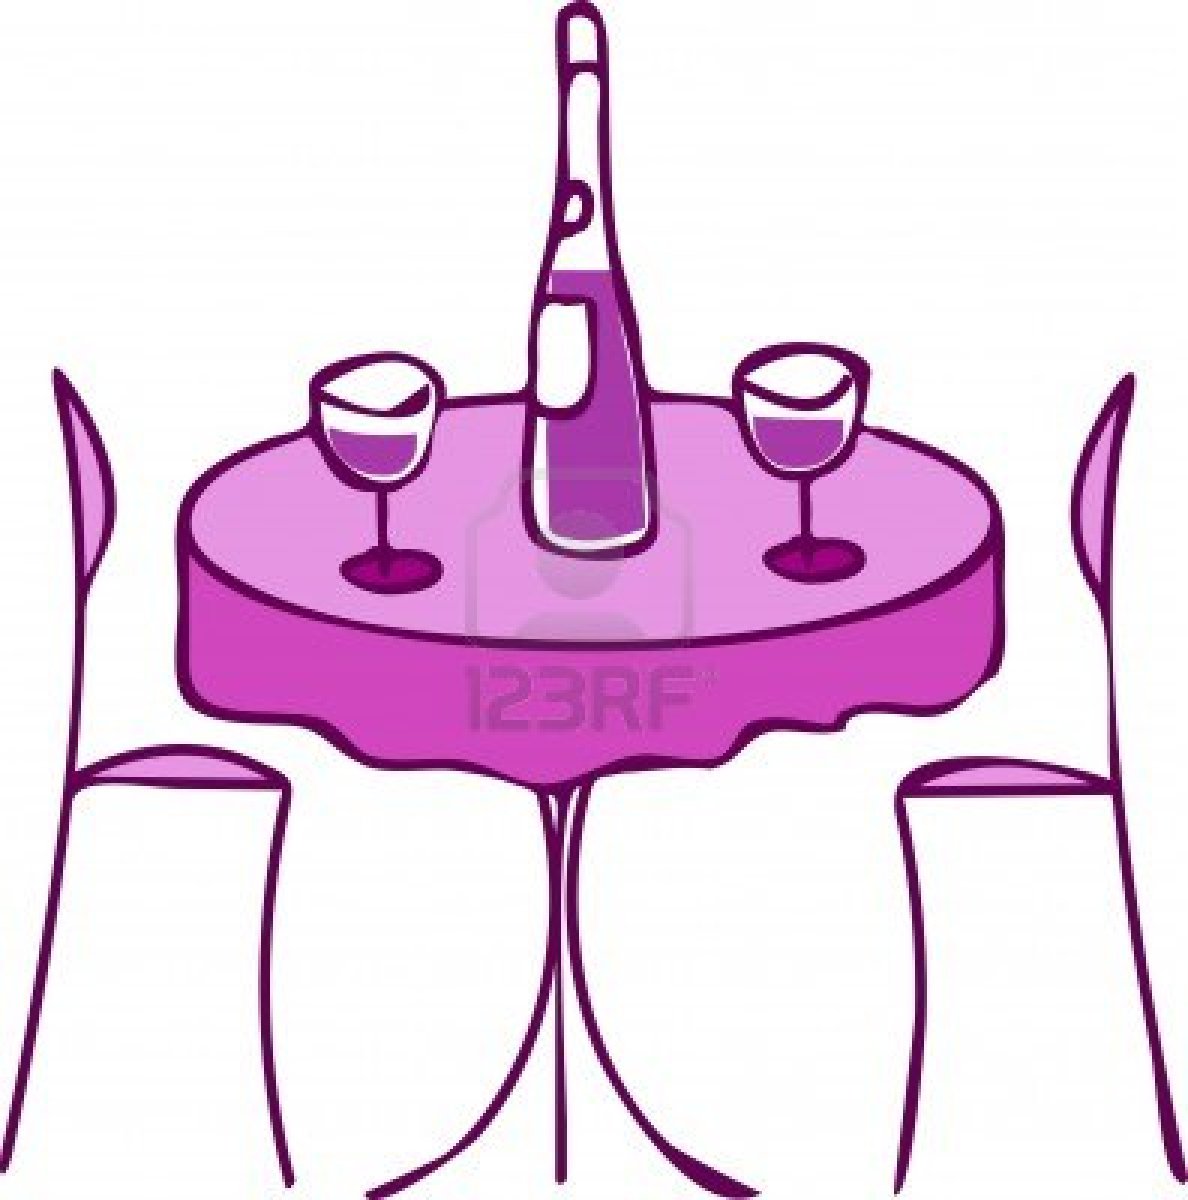 Dinner Table Clip Art   Clipart Panda   Free Clipart Images